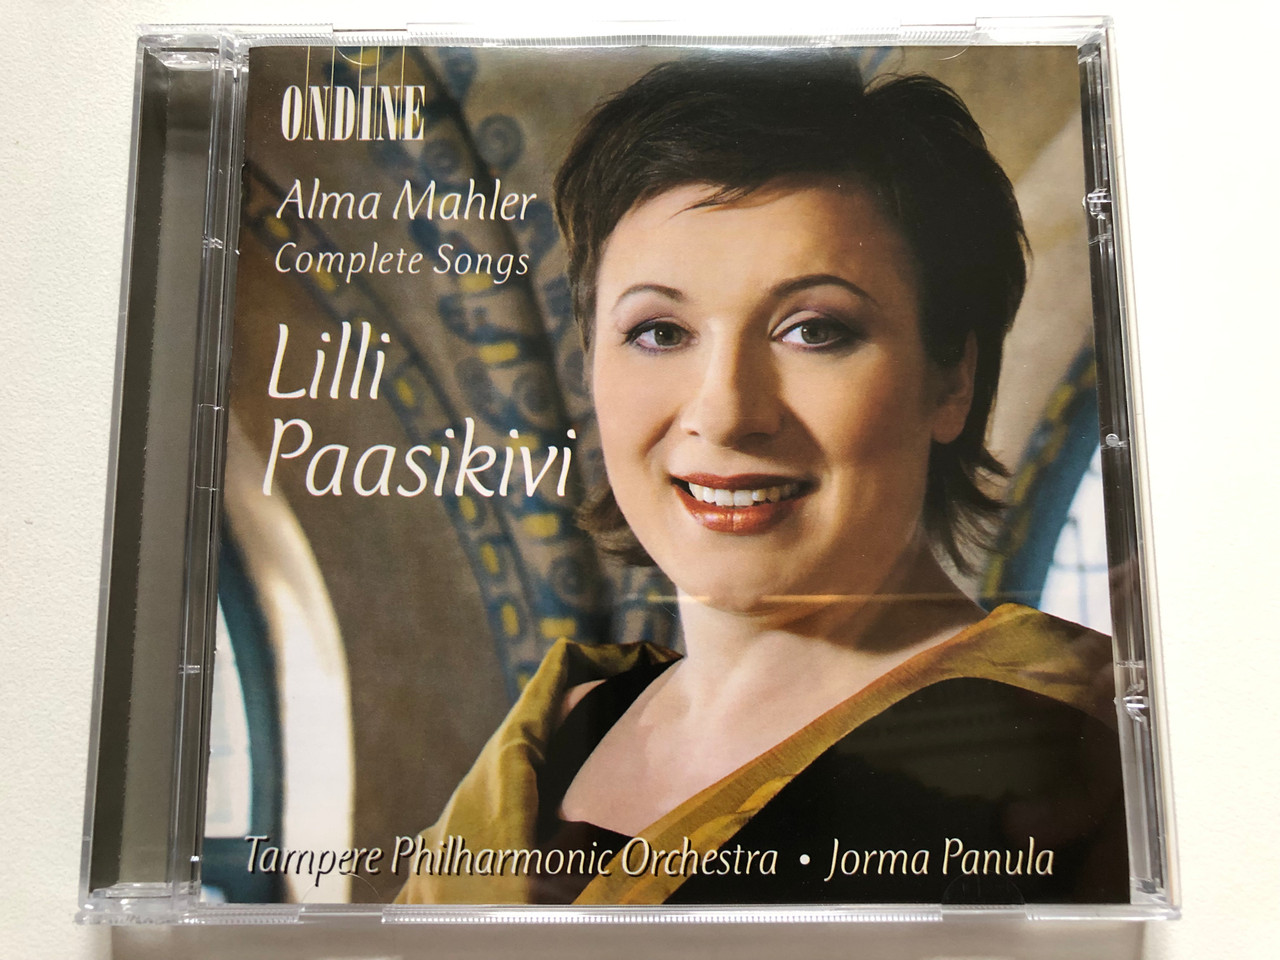 https://cdn10.bigcommerce.com/s-62bdpkt7pb/products/0/images/306817/Alma_Mahler_Complete_Songs_-_Lilli_Paasikivi_Tampere_Philharmonic_Orchestra_Jorma_Panula_Ondine_Audio_CD_2003_ODE_1024-2_1__30978.1698398972.1280.1280.JPG?c=2